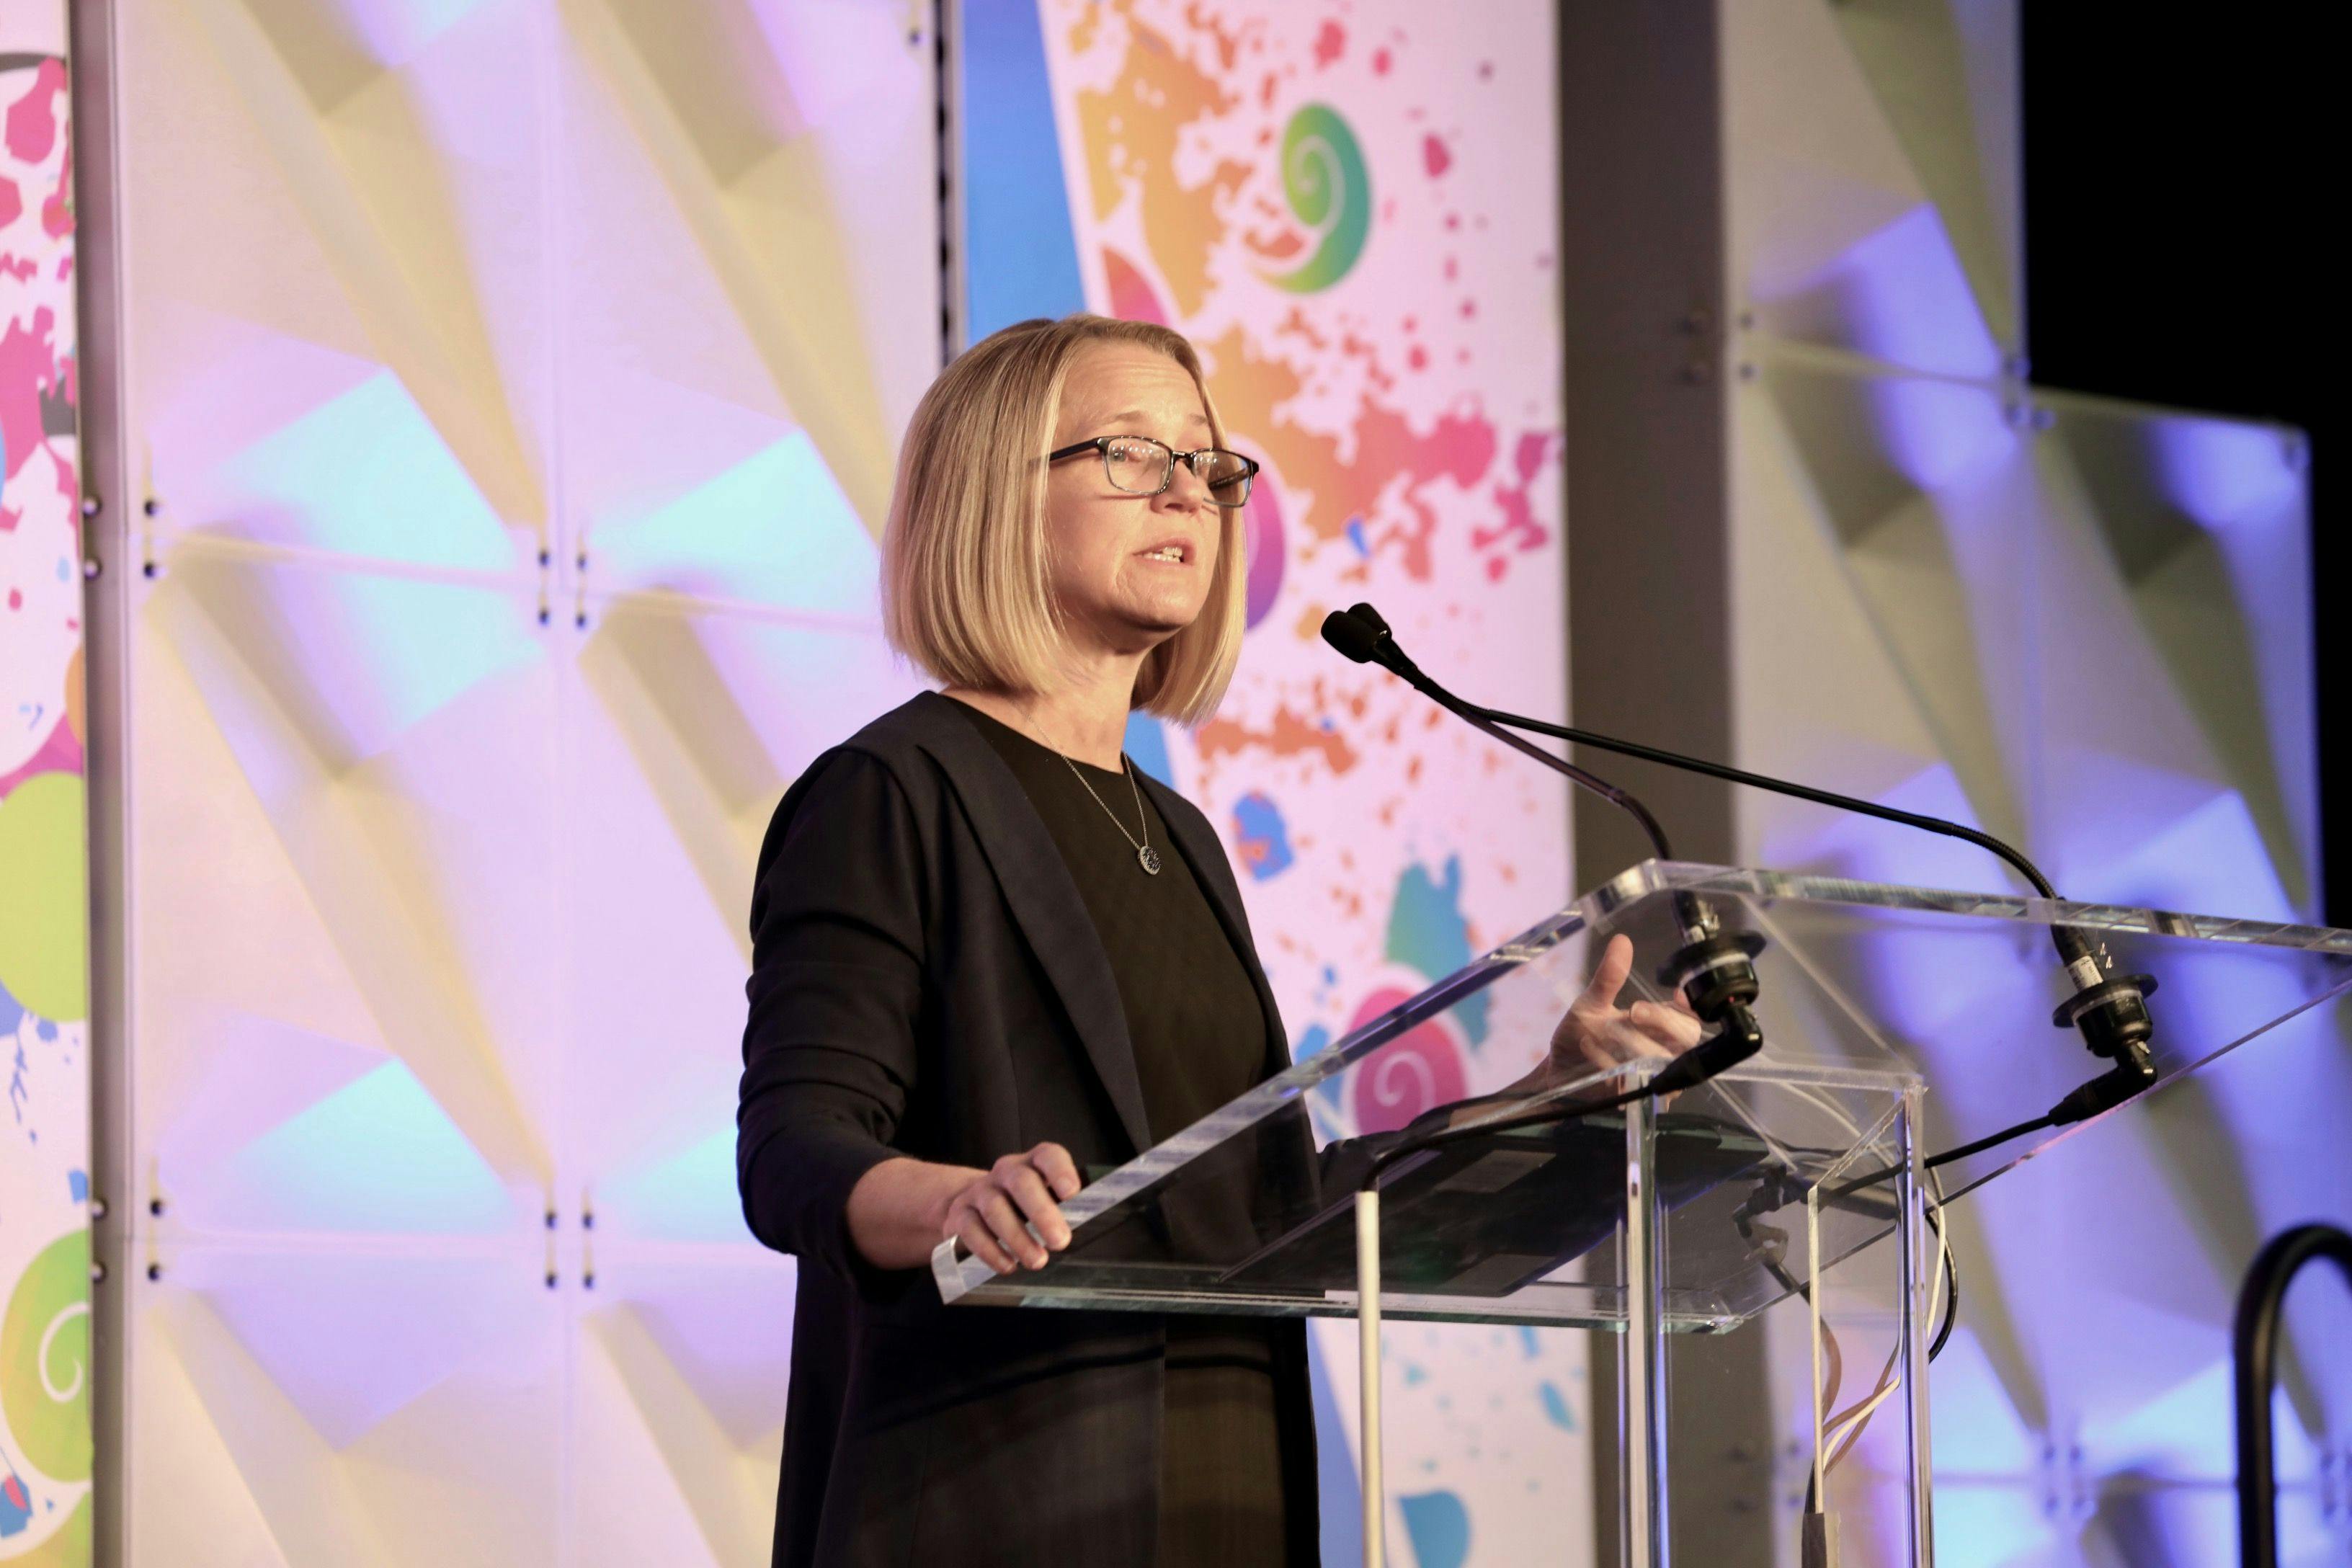 Jennifer Graves, MD, PhD, addresses the room about her findings at the CMSC Annual Meeting.
Image courtesy: Shmulik Almany